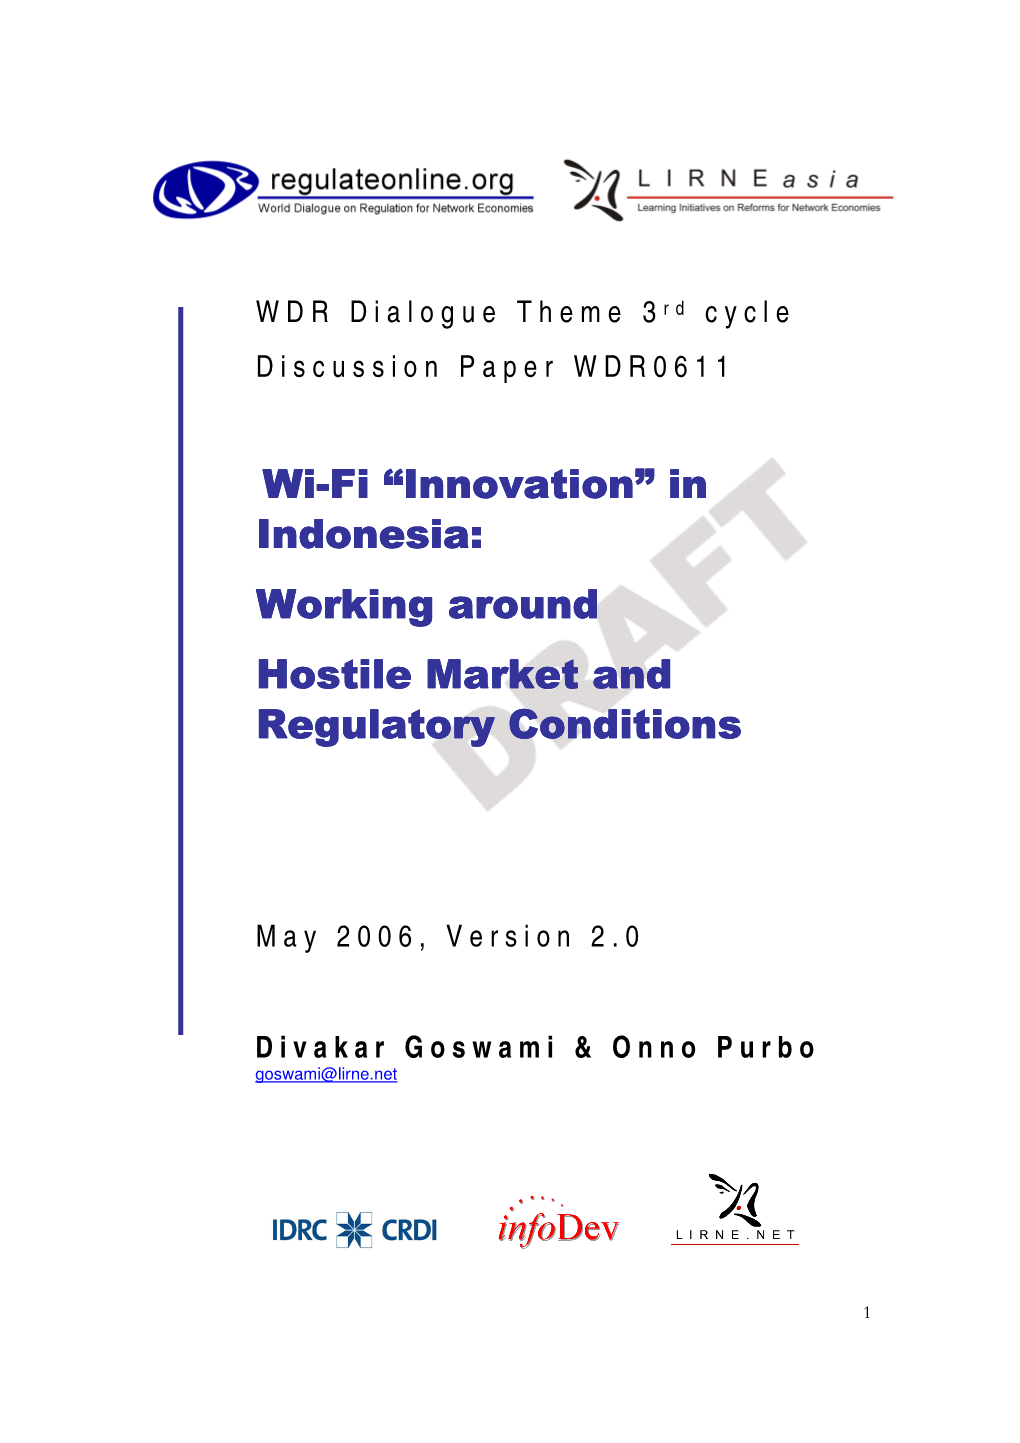 Wi-Fi “Innovation” in Indonesia: Working Around Hostile Market and Regulatory Conditions